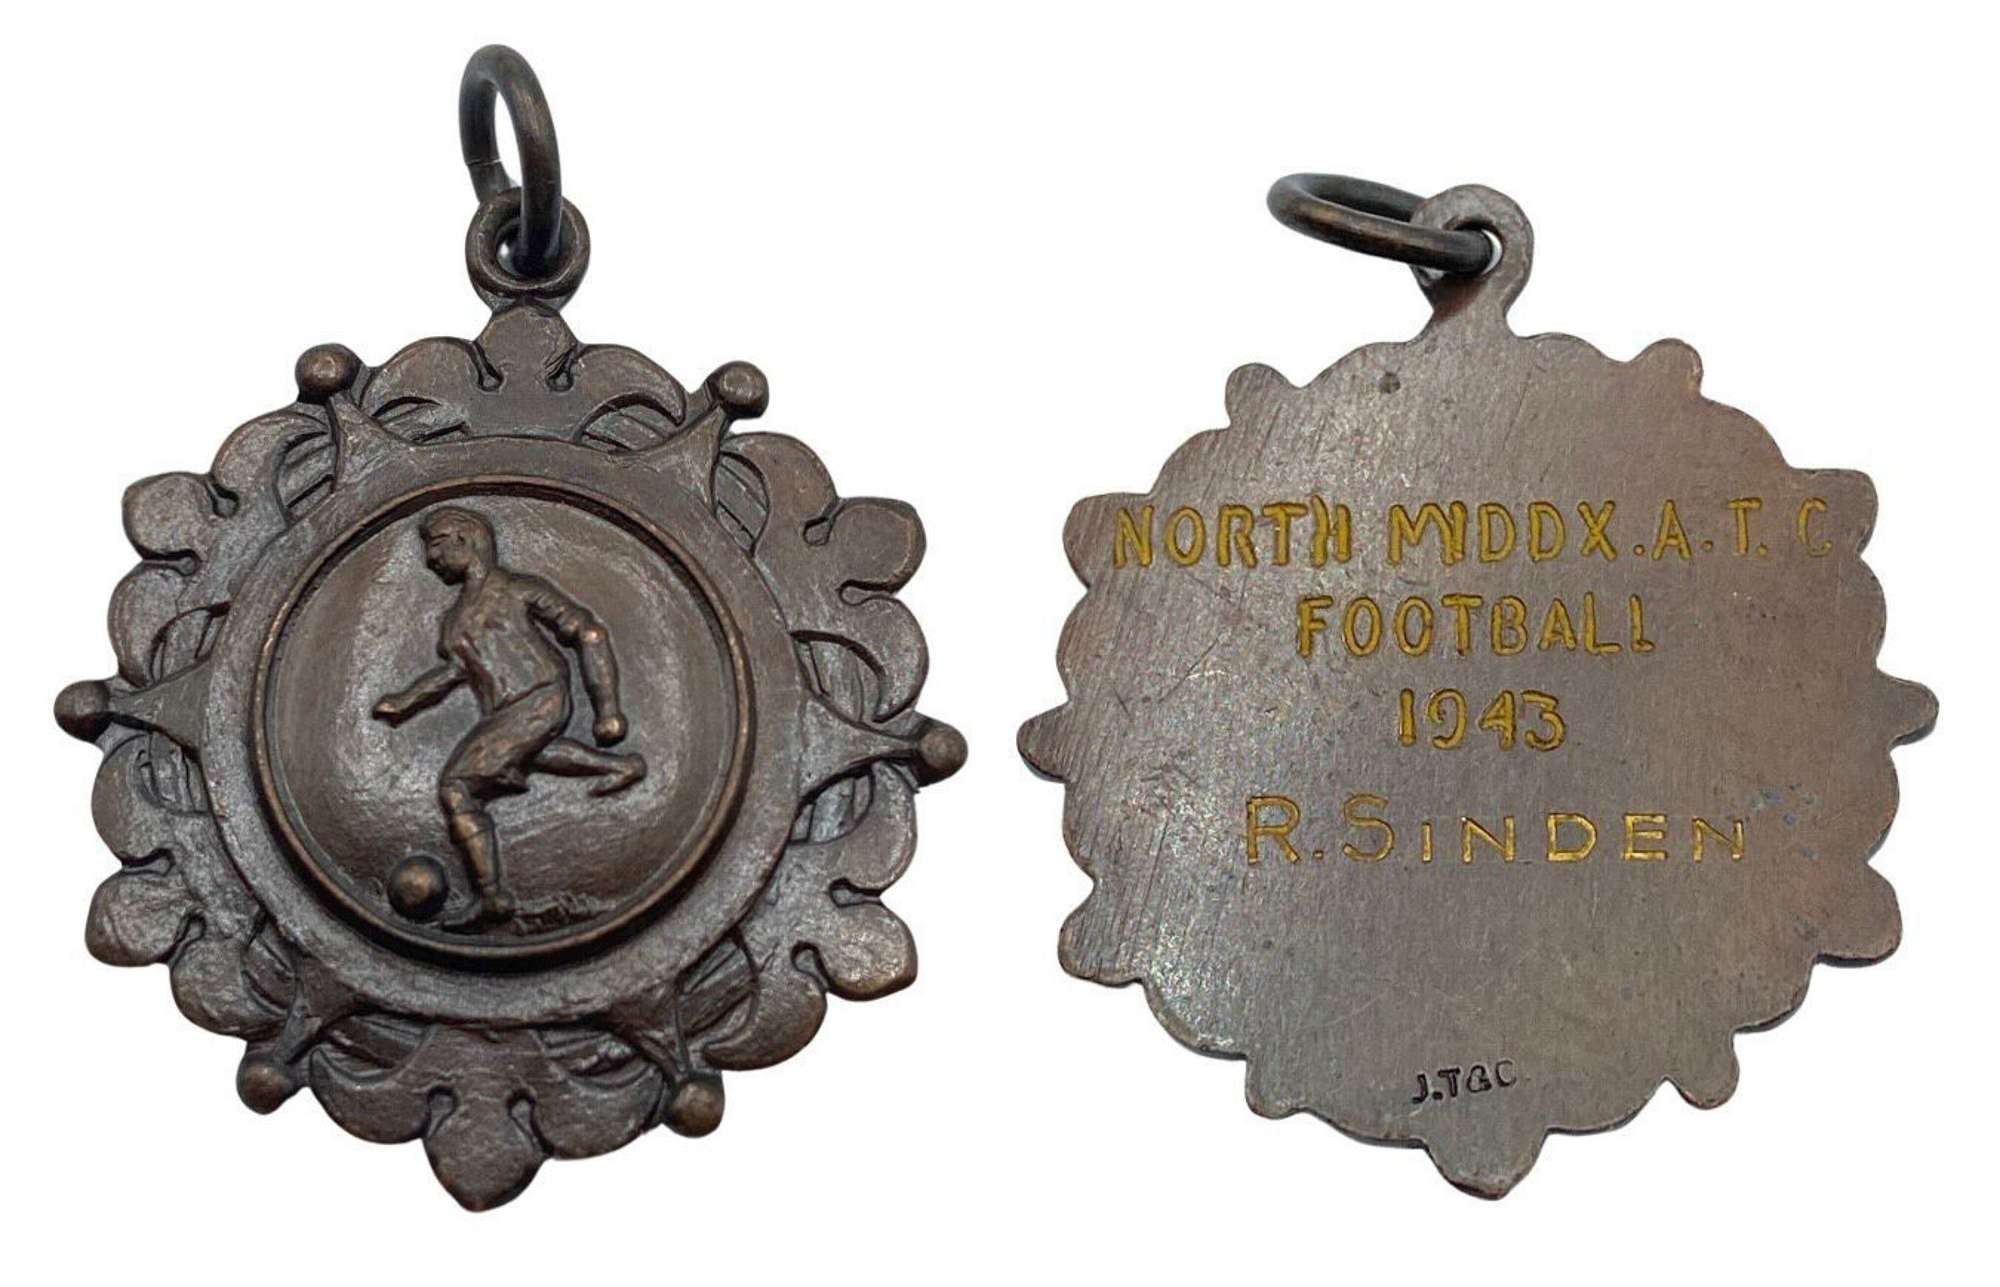 WW2 British North Middlesex Army Training Corps Football 1943 Medal